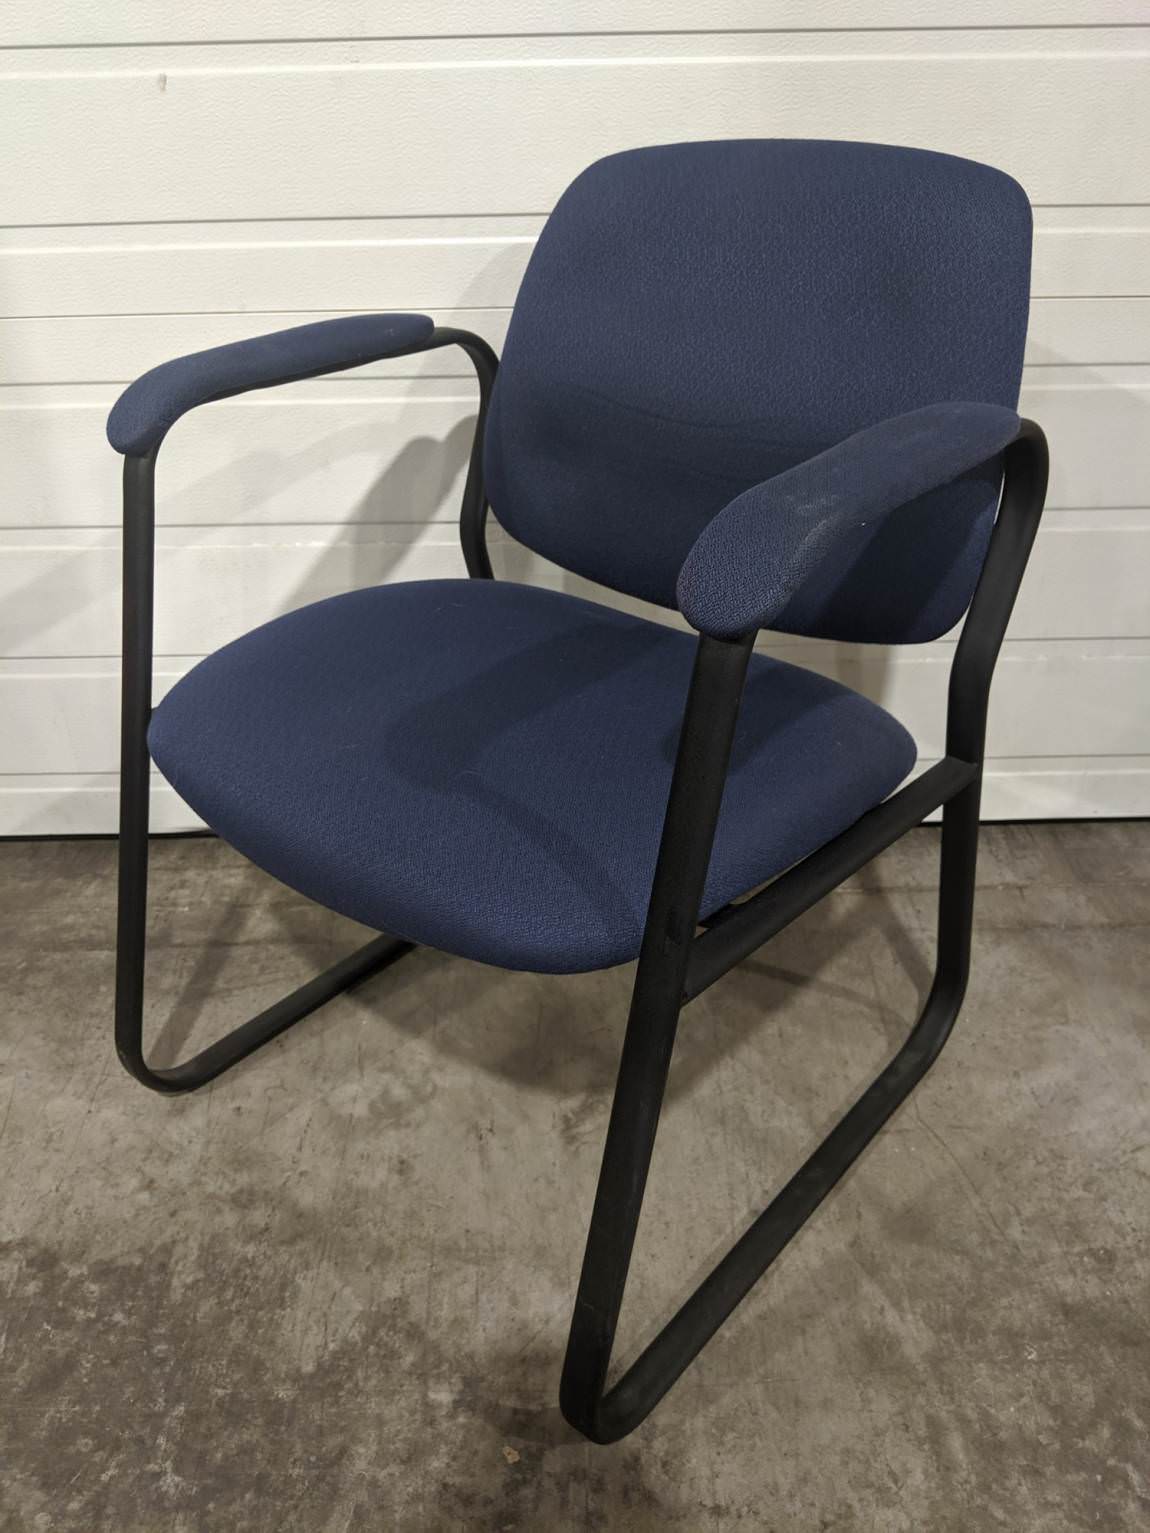 Global Blue Guest Chair with Black Metal Frame